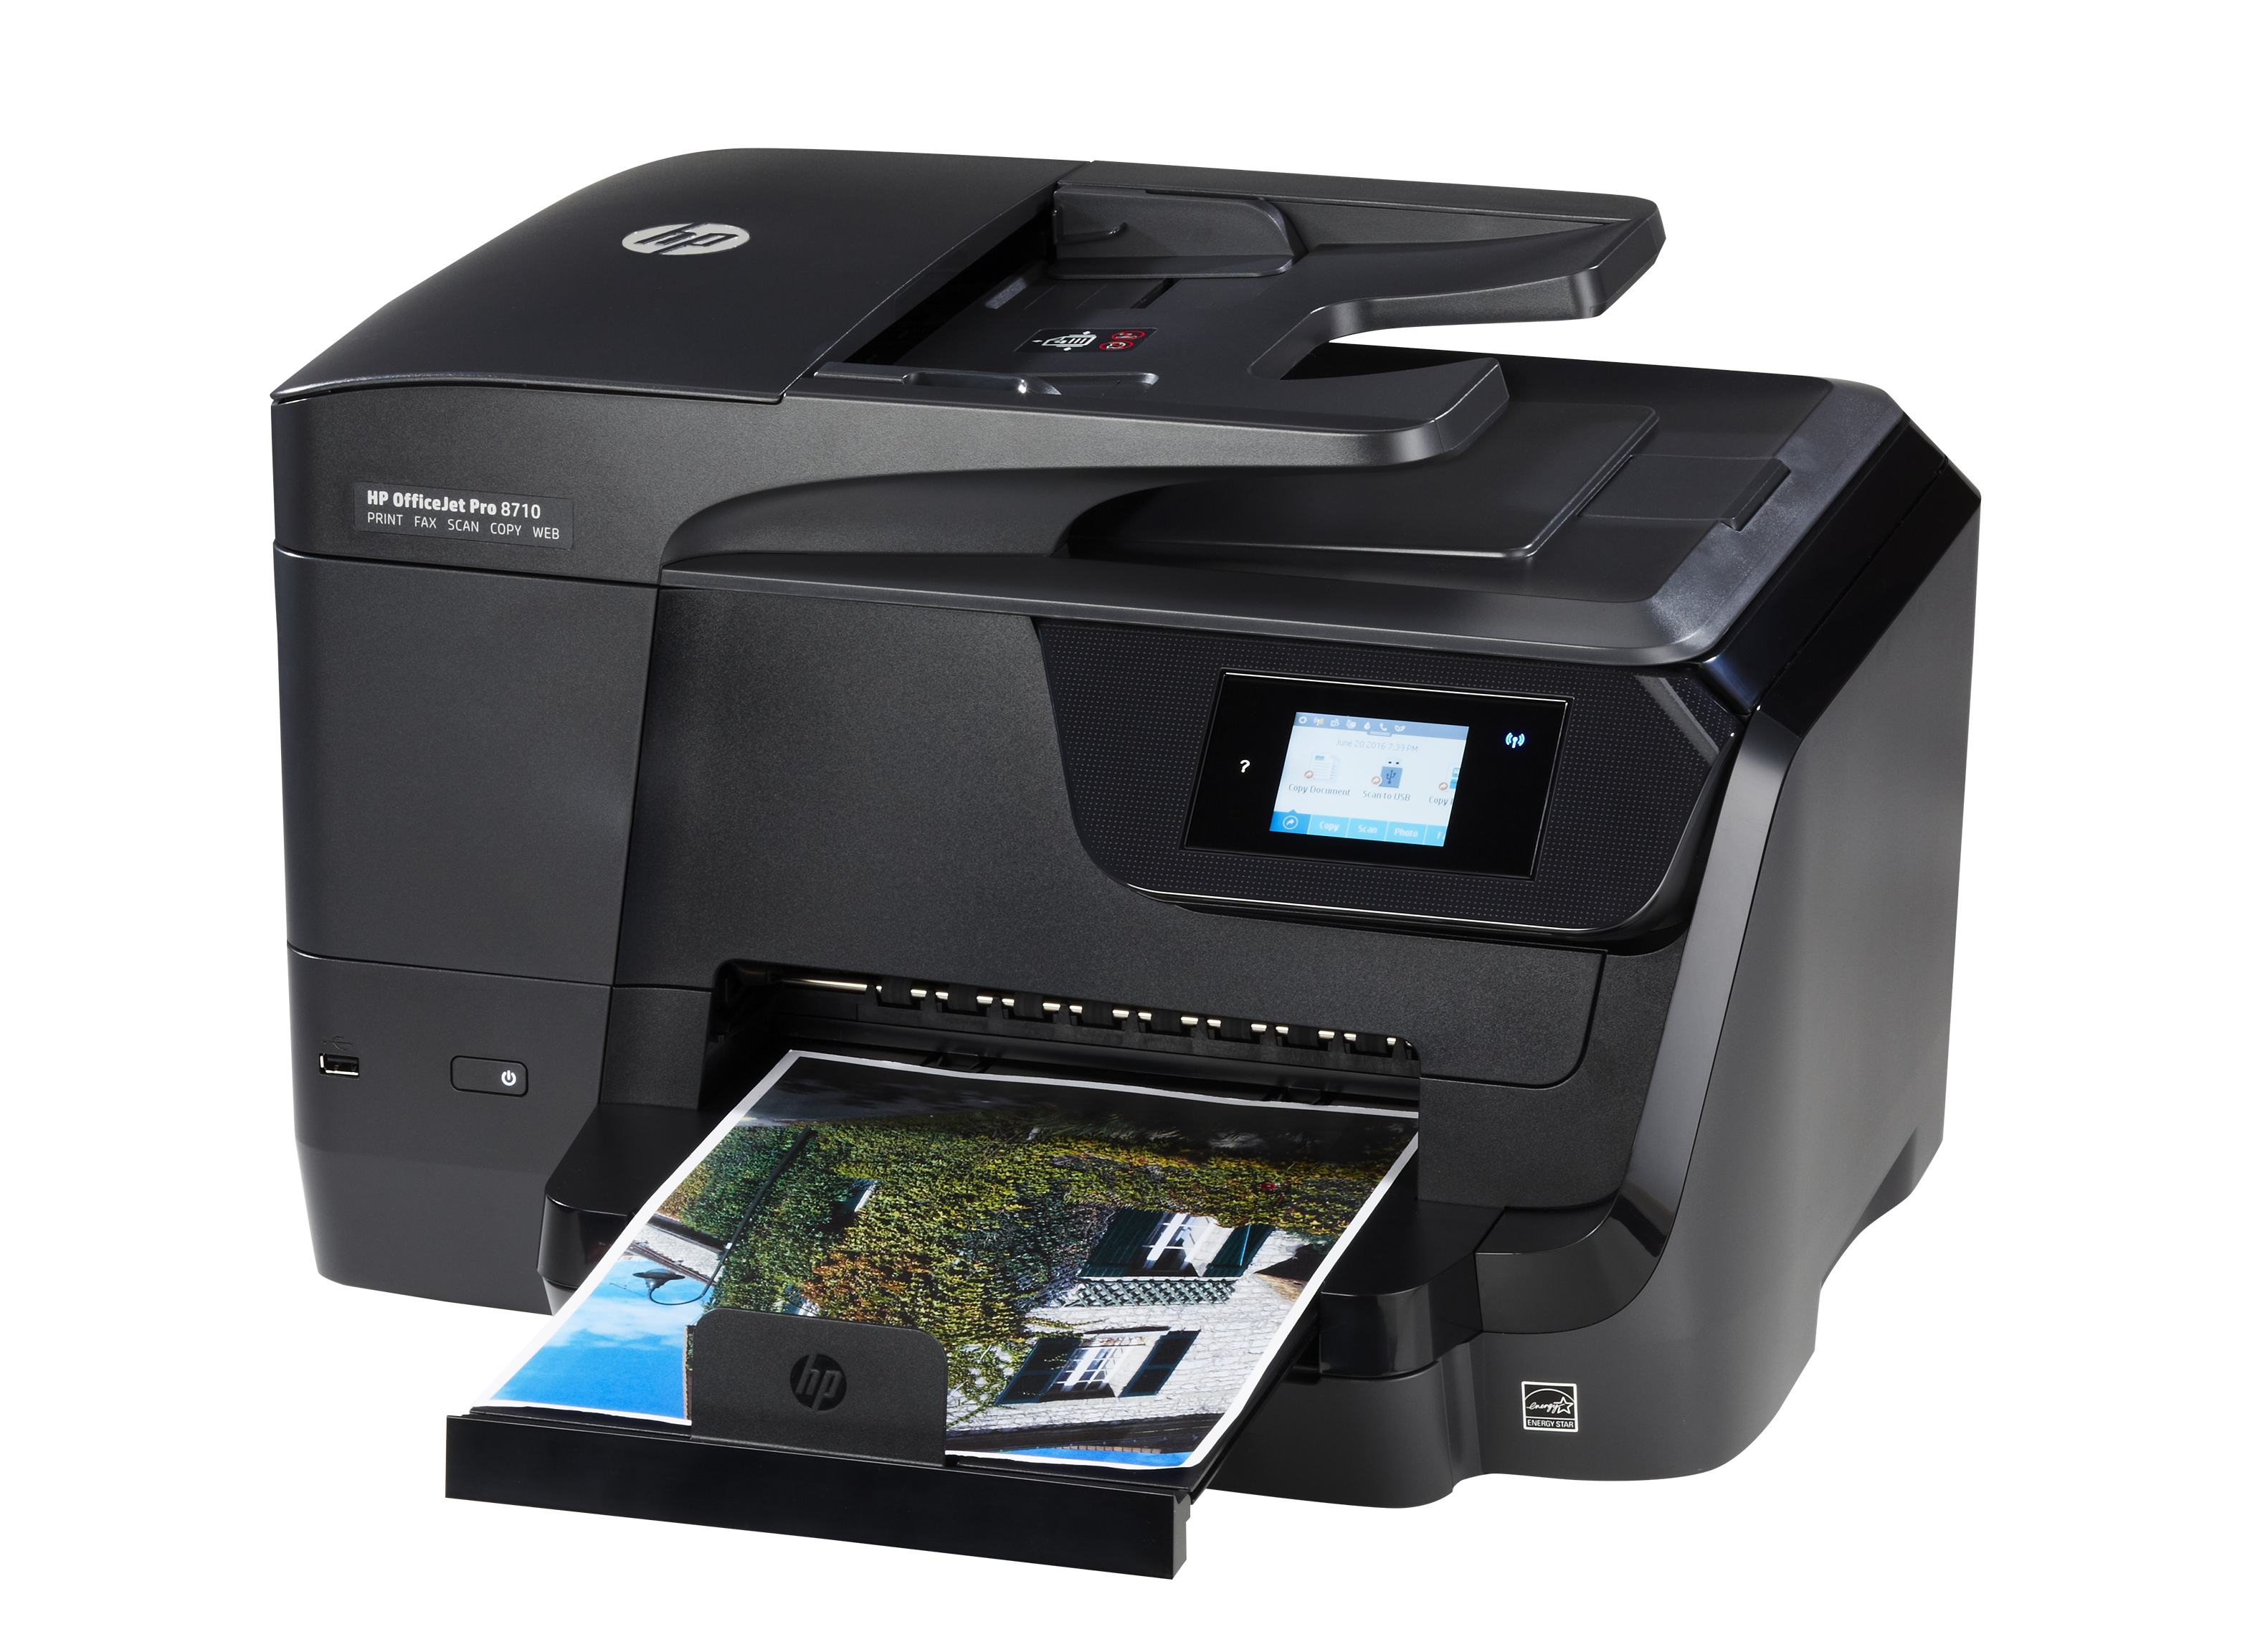 HP Officejet Pro 8710 Printer Review Reports